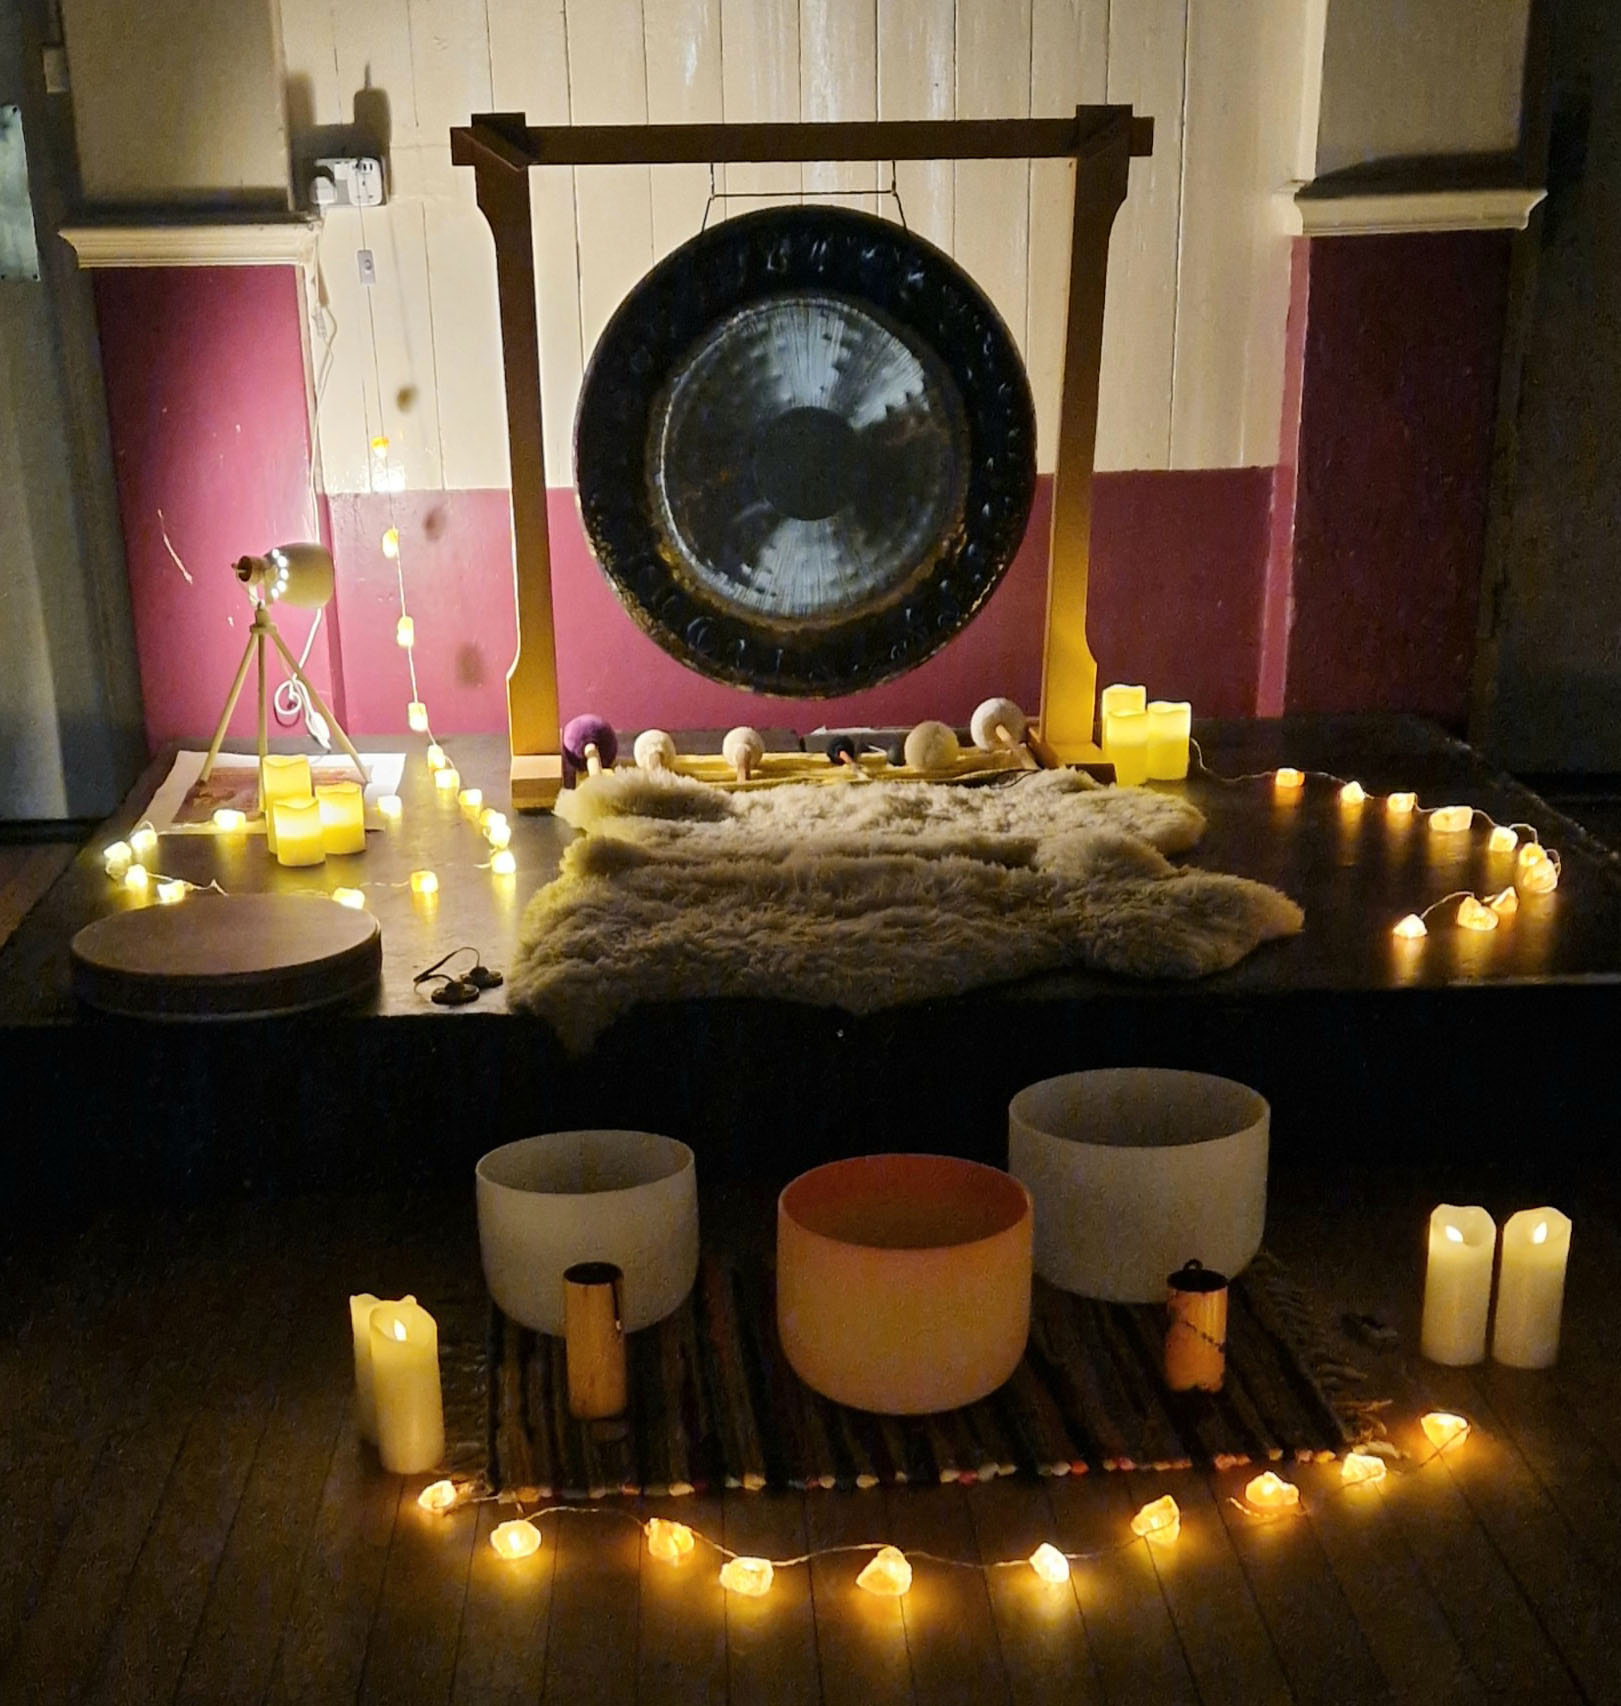 Gong Bath at Chingford in East London